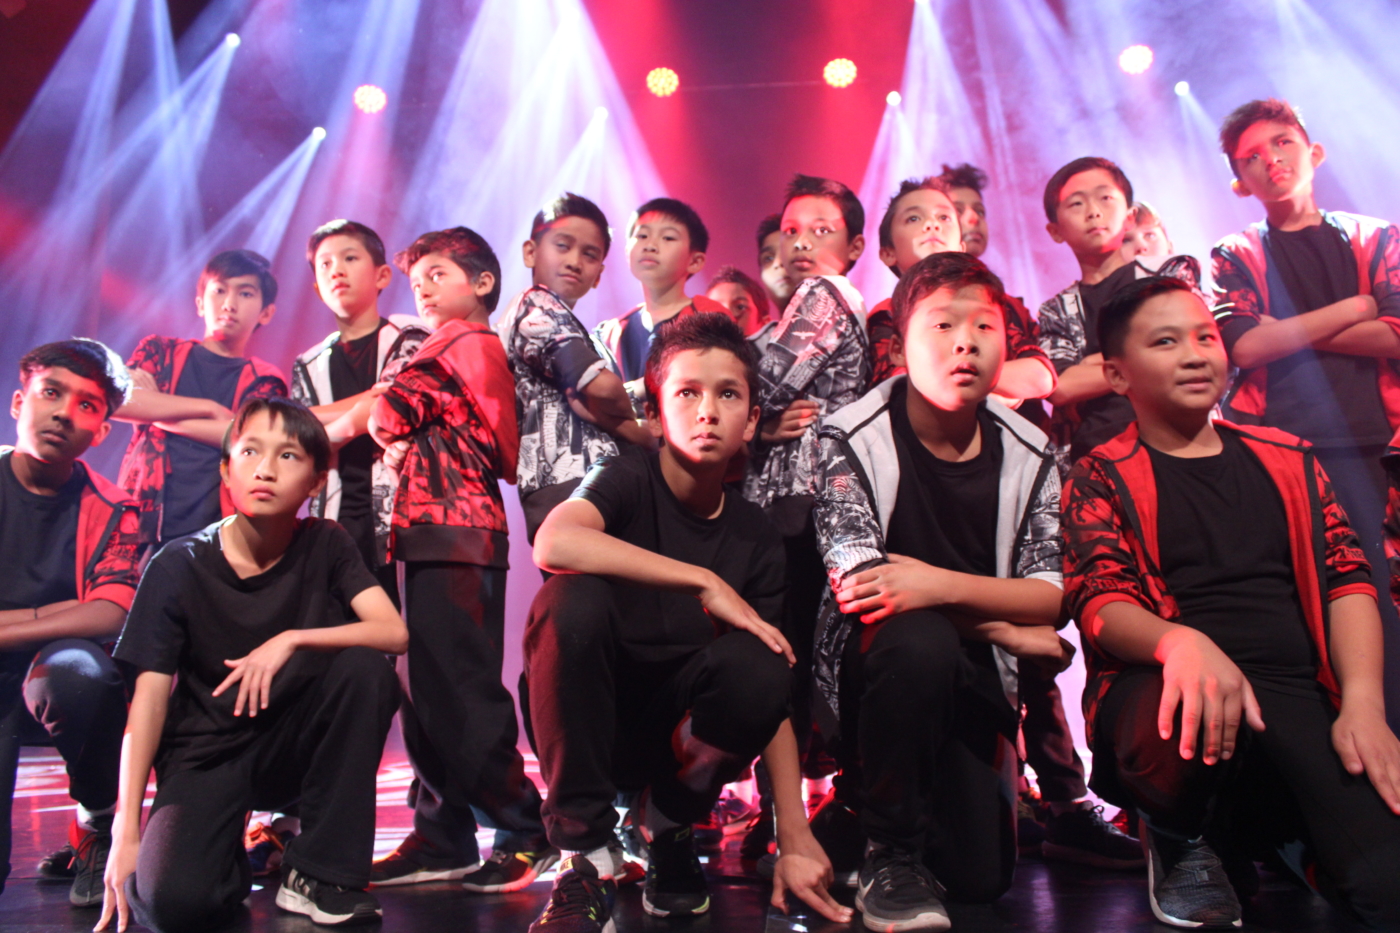 boys dance ensemble in finishing pose on stage at festival